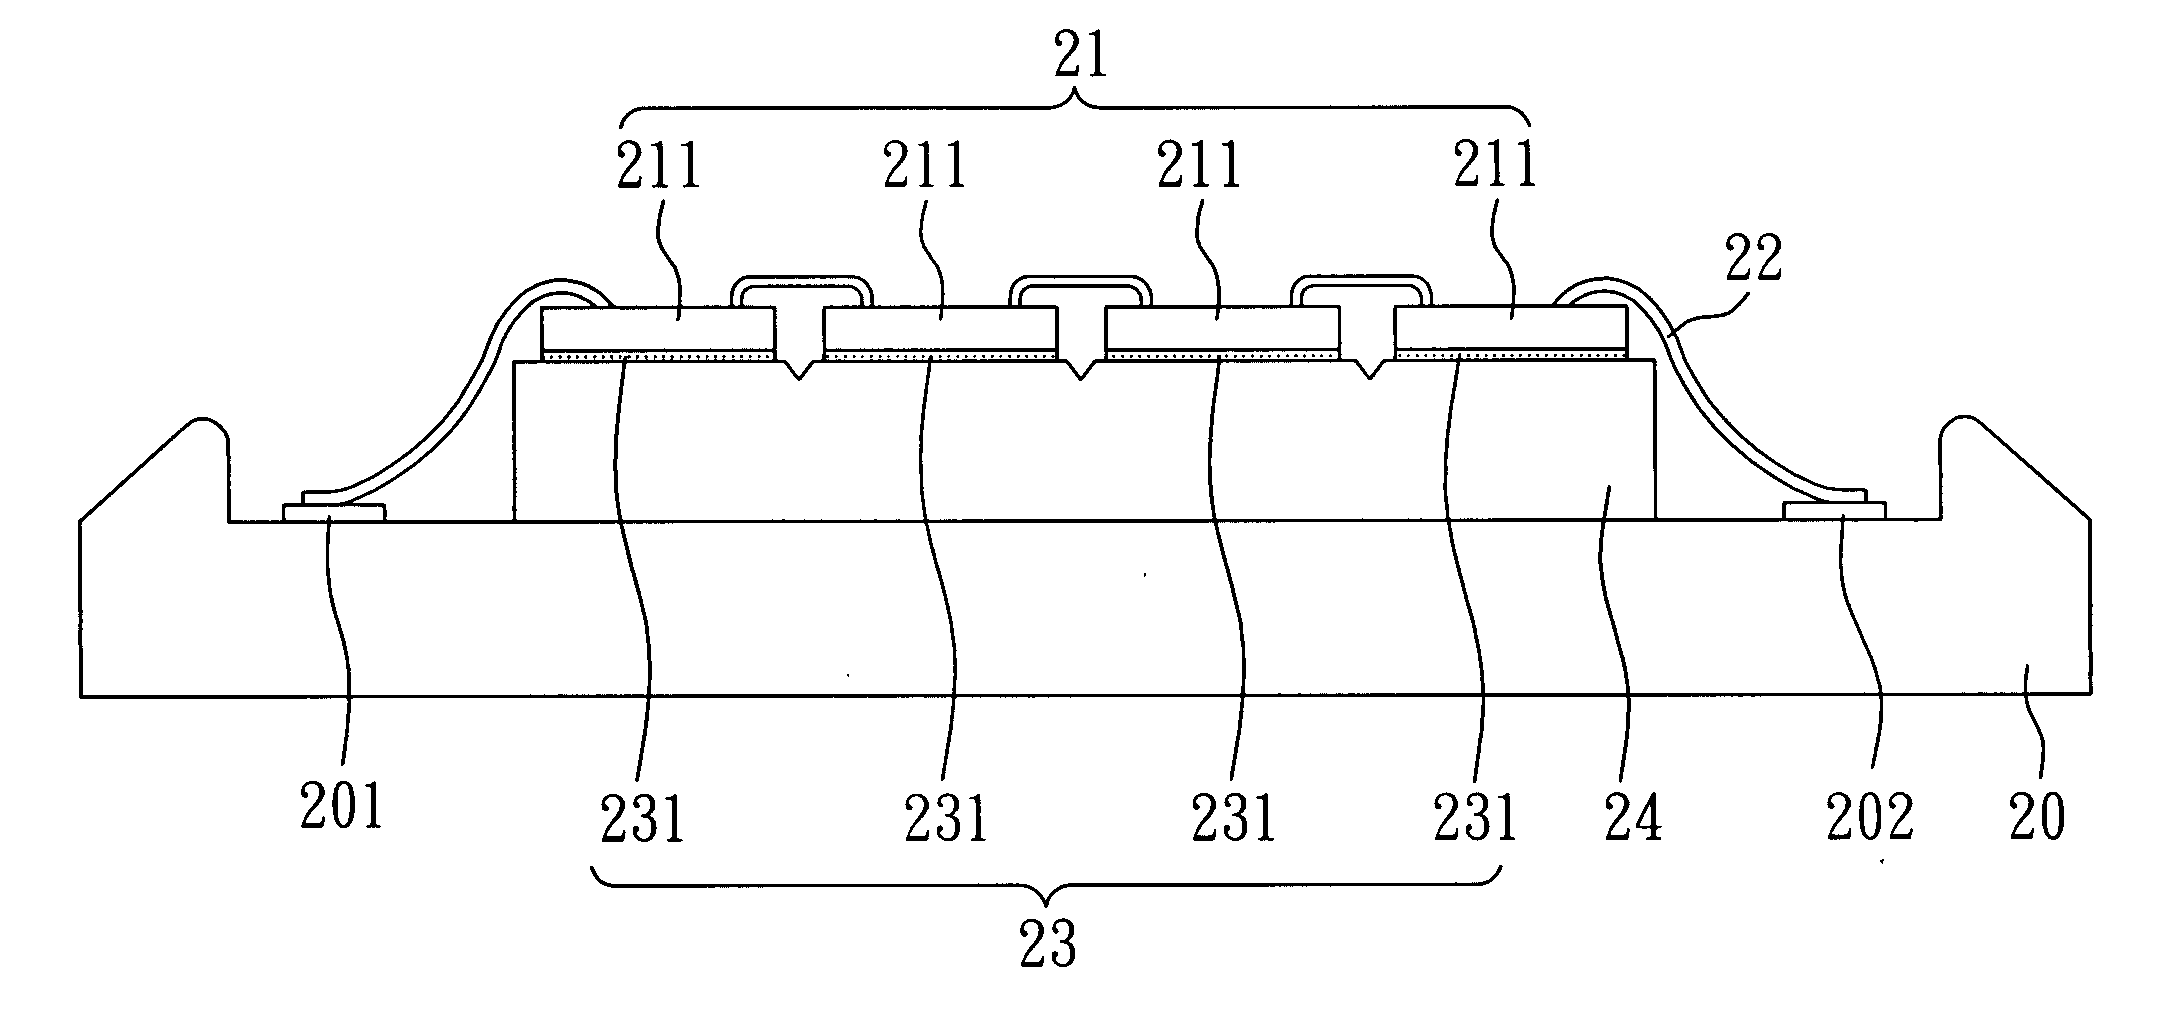 Packaging Structure of AC light-emitting diodes